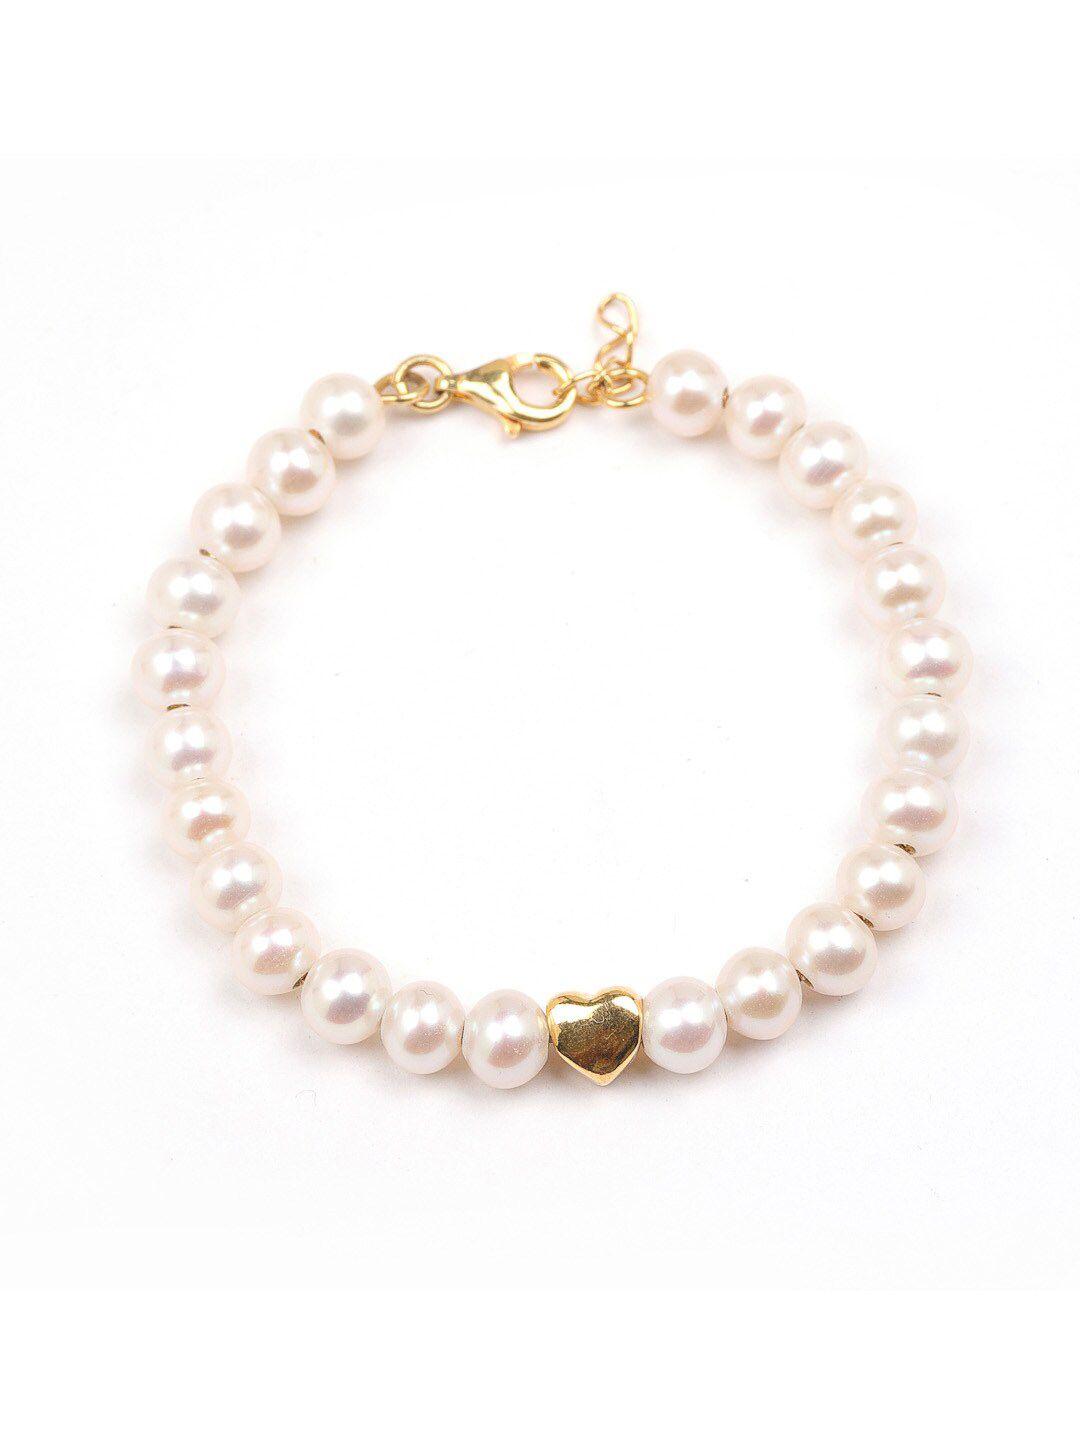 stone story by shruti girls white sterling silver pearls handcrafted gold-plated charm bracelet